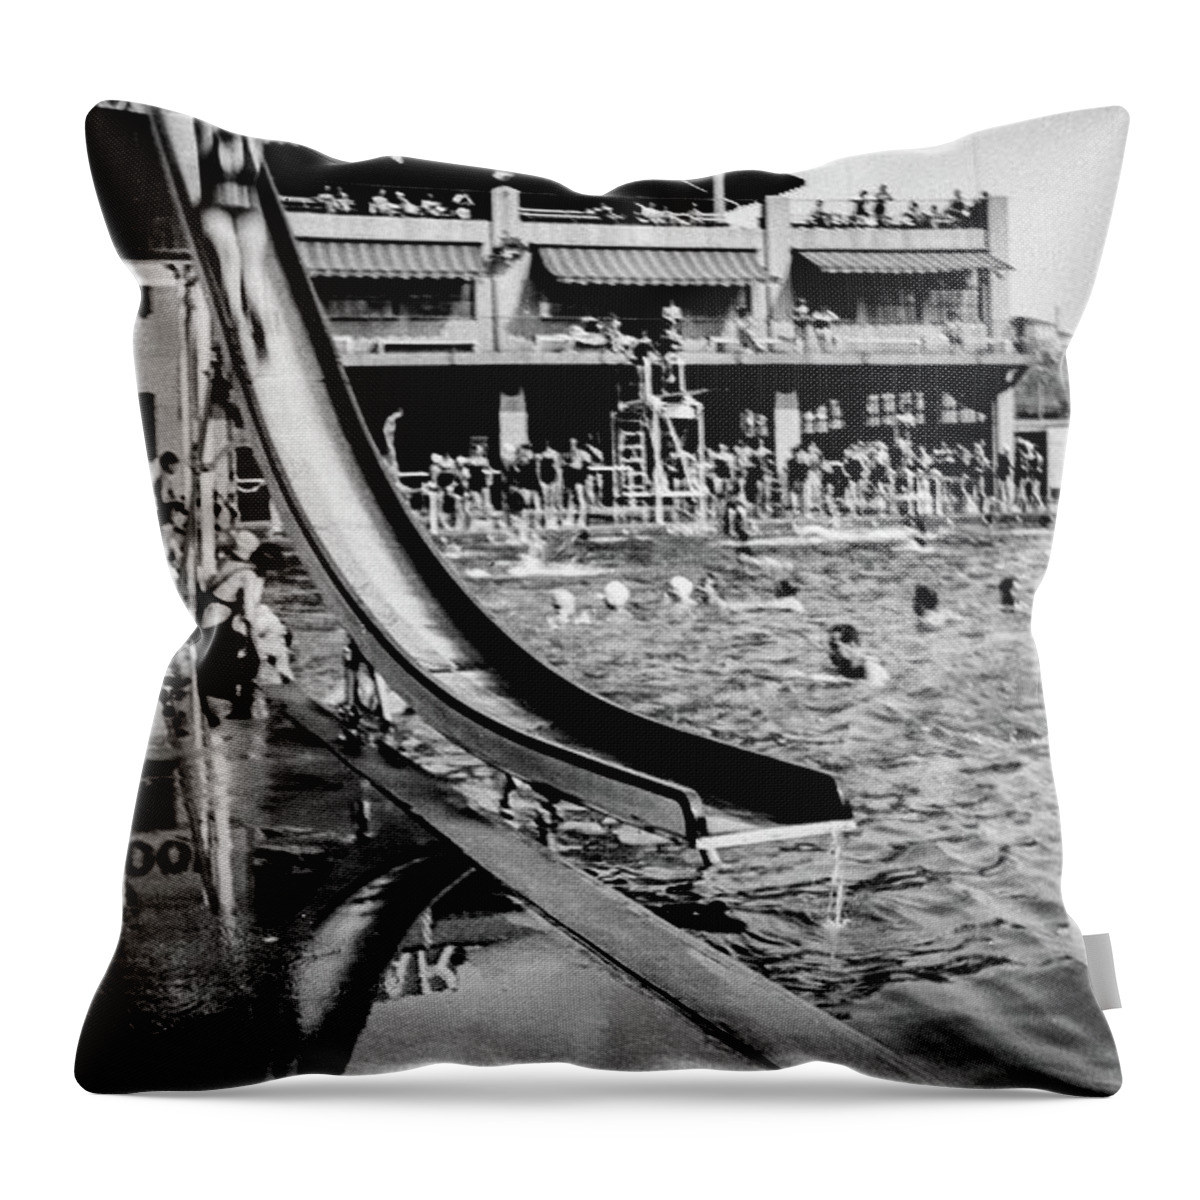 Miramar Throw Pillow featuring the photograph Miramar Pool by Cole Thompson